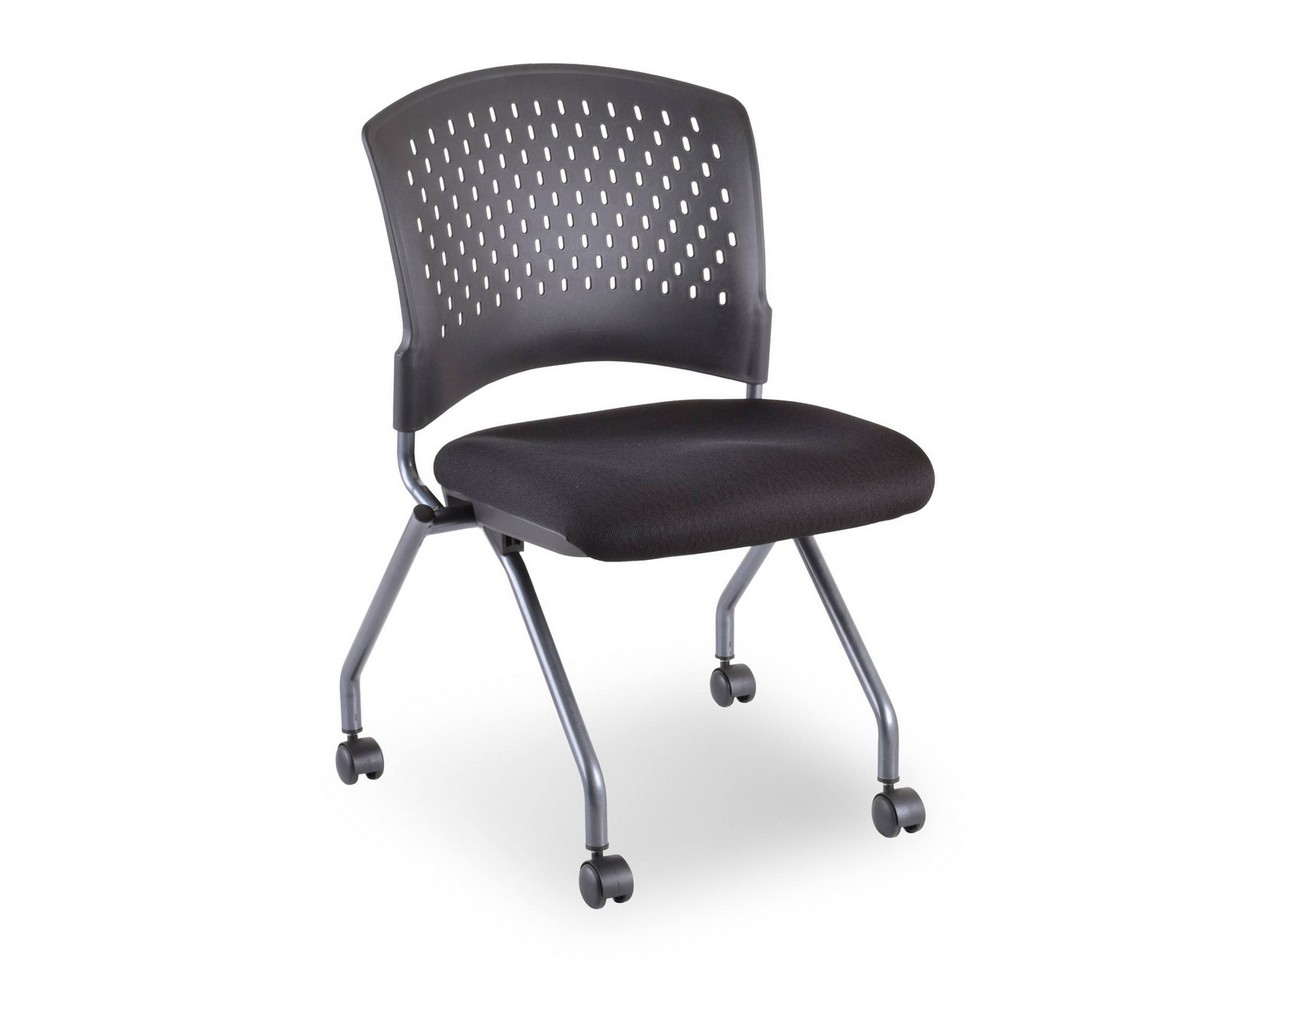 Agenda II Nesting Chair Without Arms – Black Fabric SKU 3274T